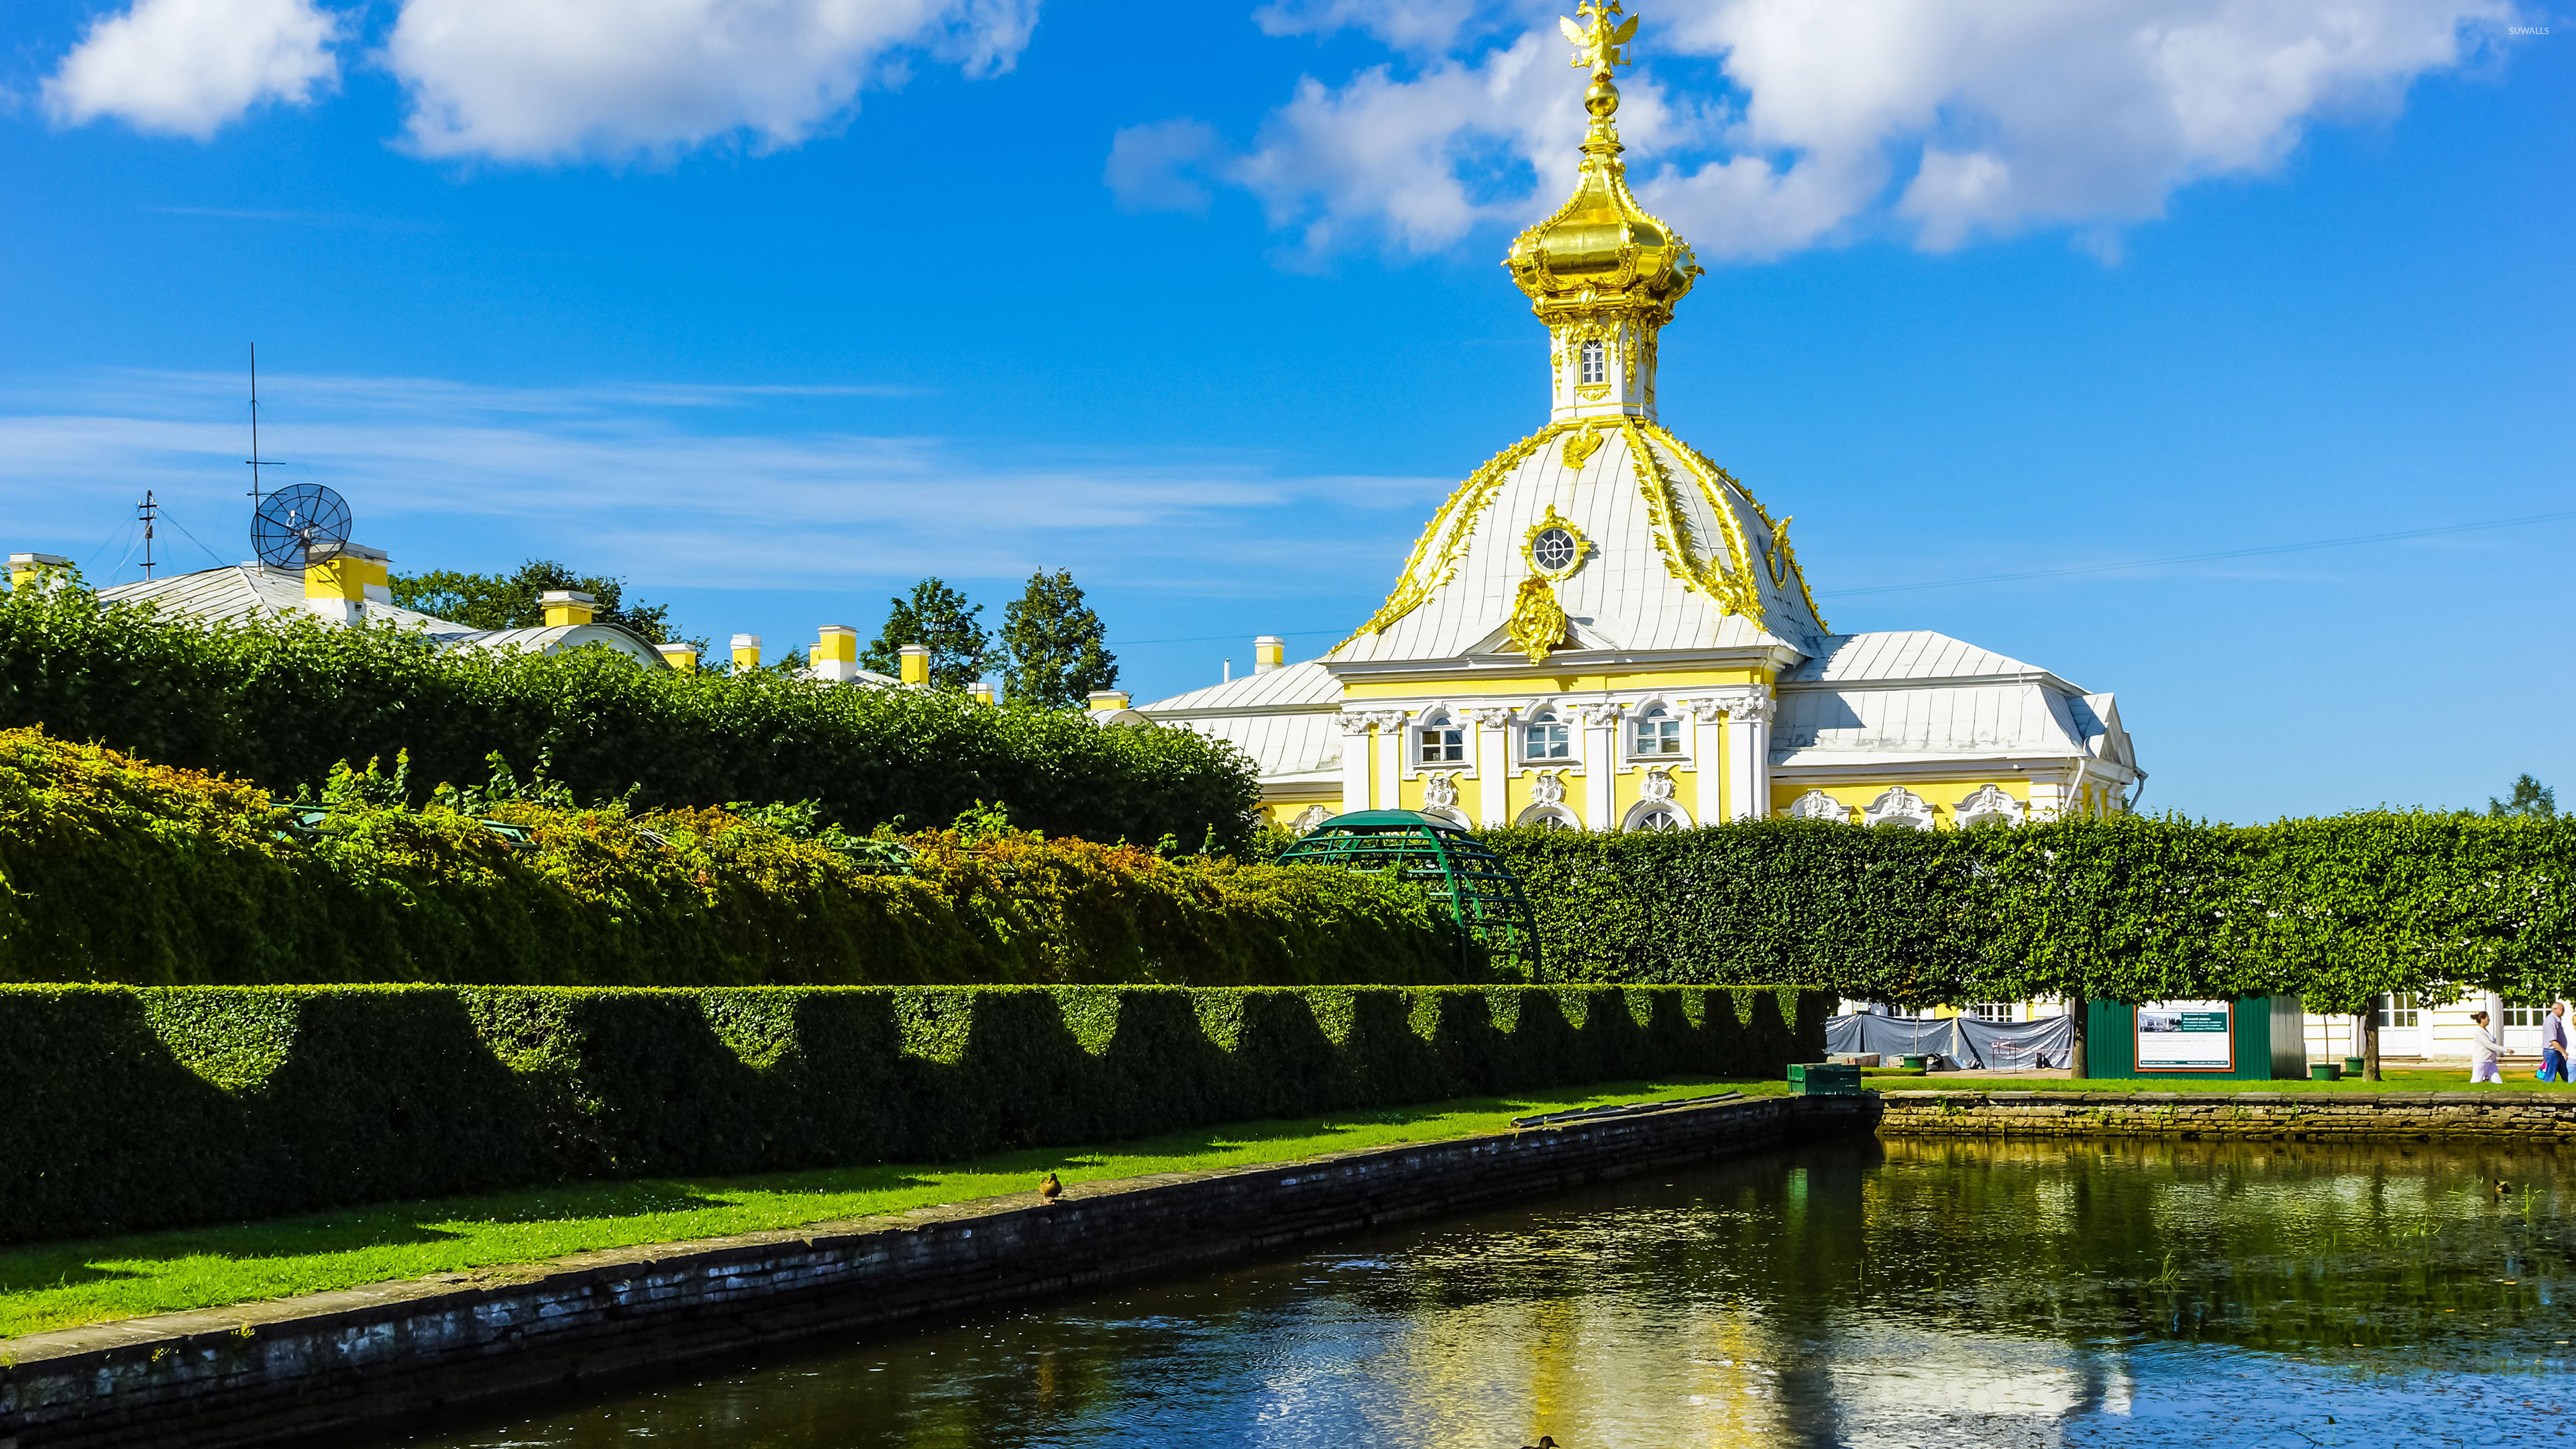 Palace: Peterhof Palace, A series of palaces and gardens located in Petergof, Saint Petersburg, Russia. 3840x2160 4K Wallpaper.